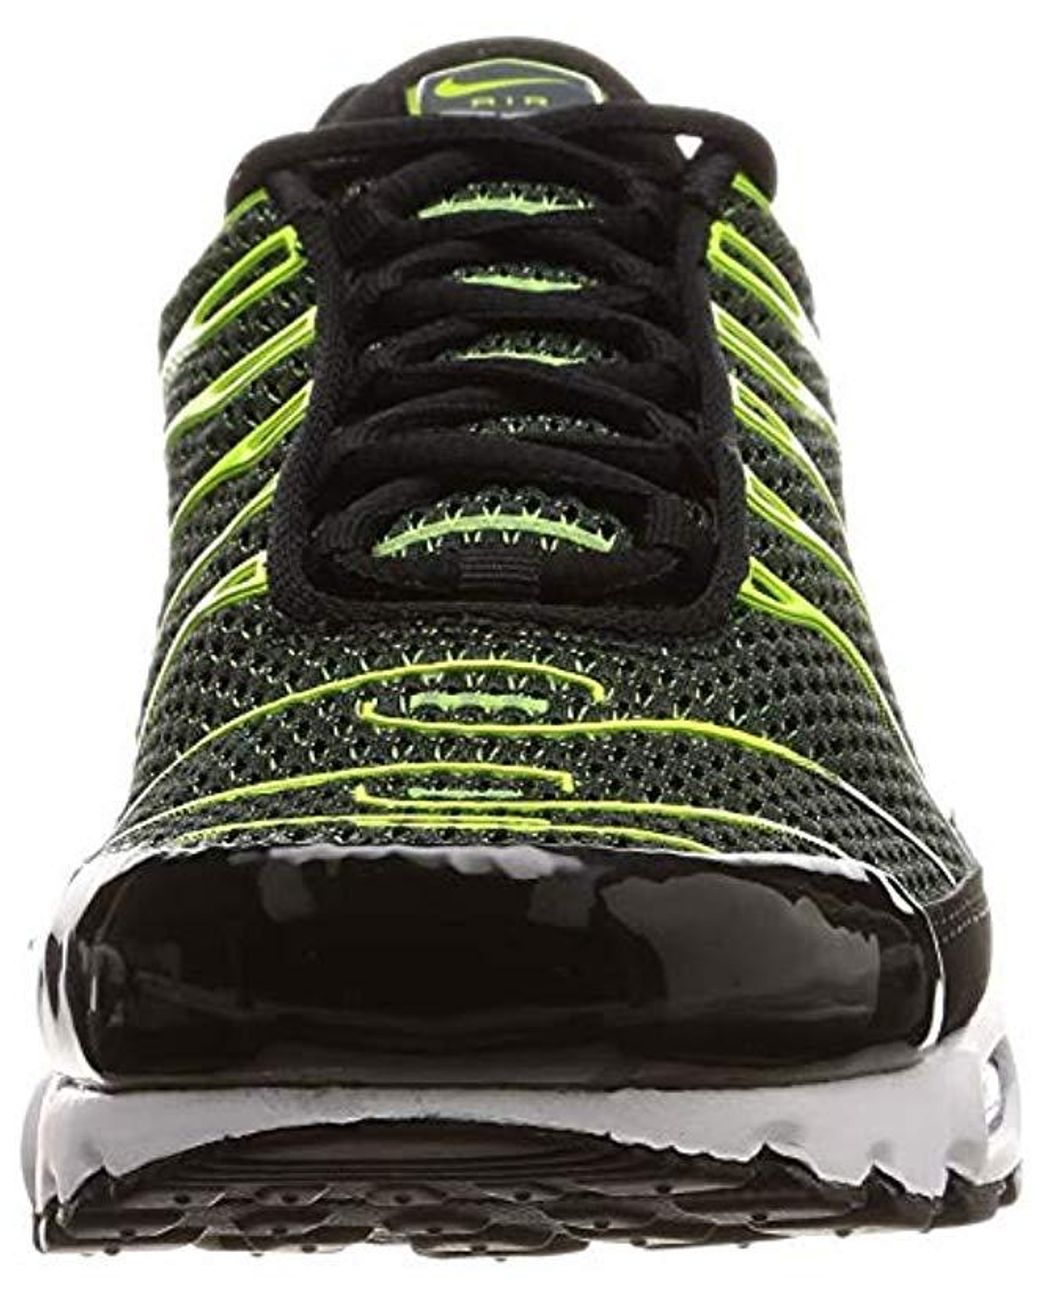 Nike Synthetic Original Air Max Plus Tuned 1 Tn Black Volt Green Trainers  Shoes 852630 036 for Men | Lyst UK